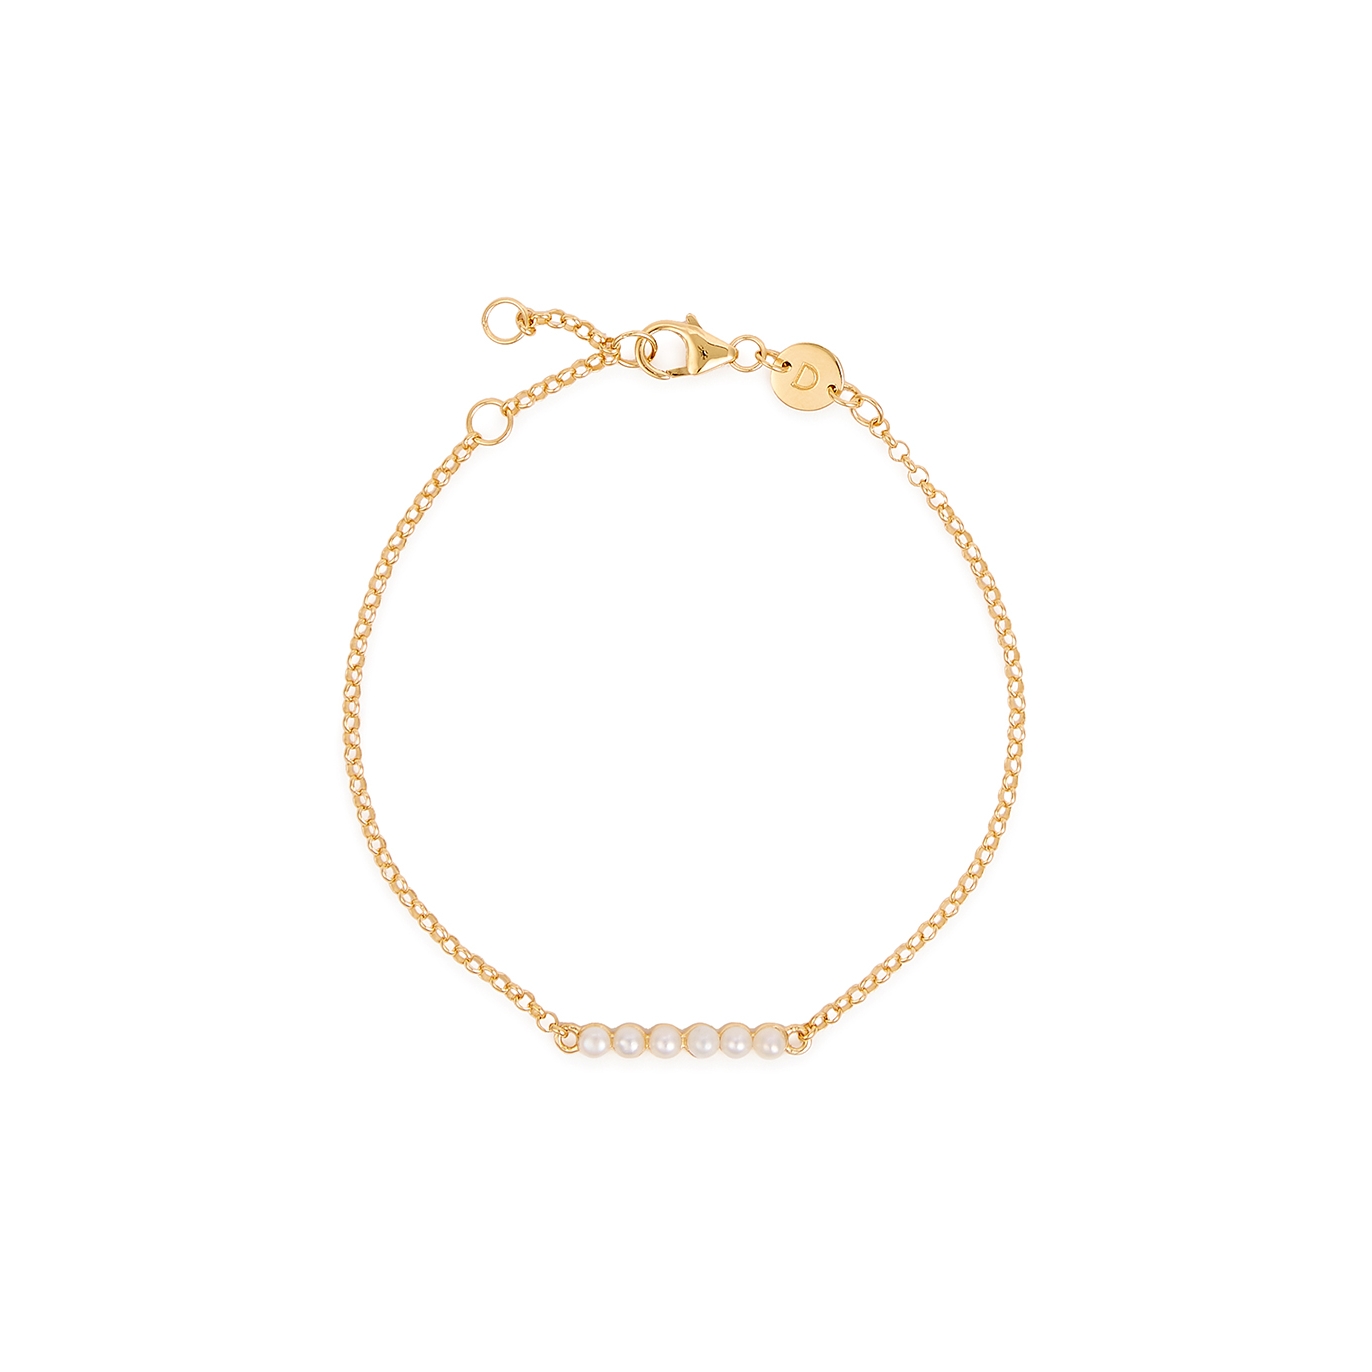 Daisy London Beloved Pearl 18kt Gold-plated Chain Bracelet - One Size